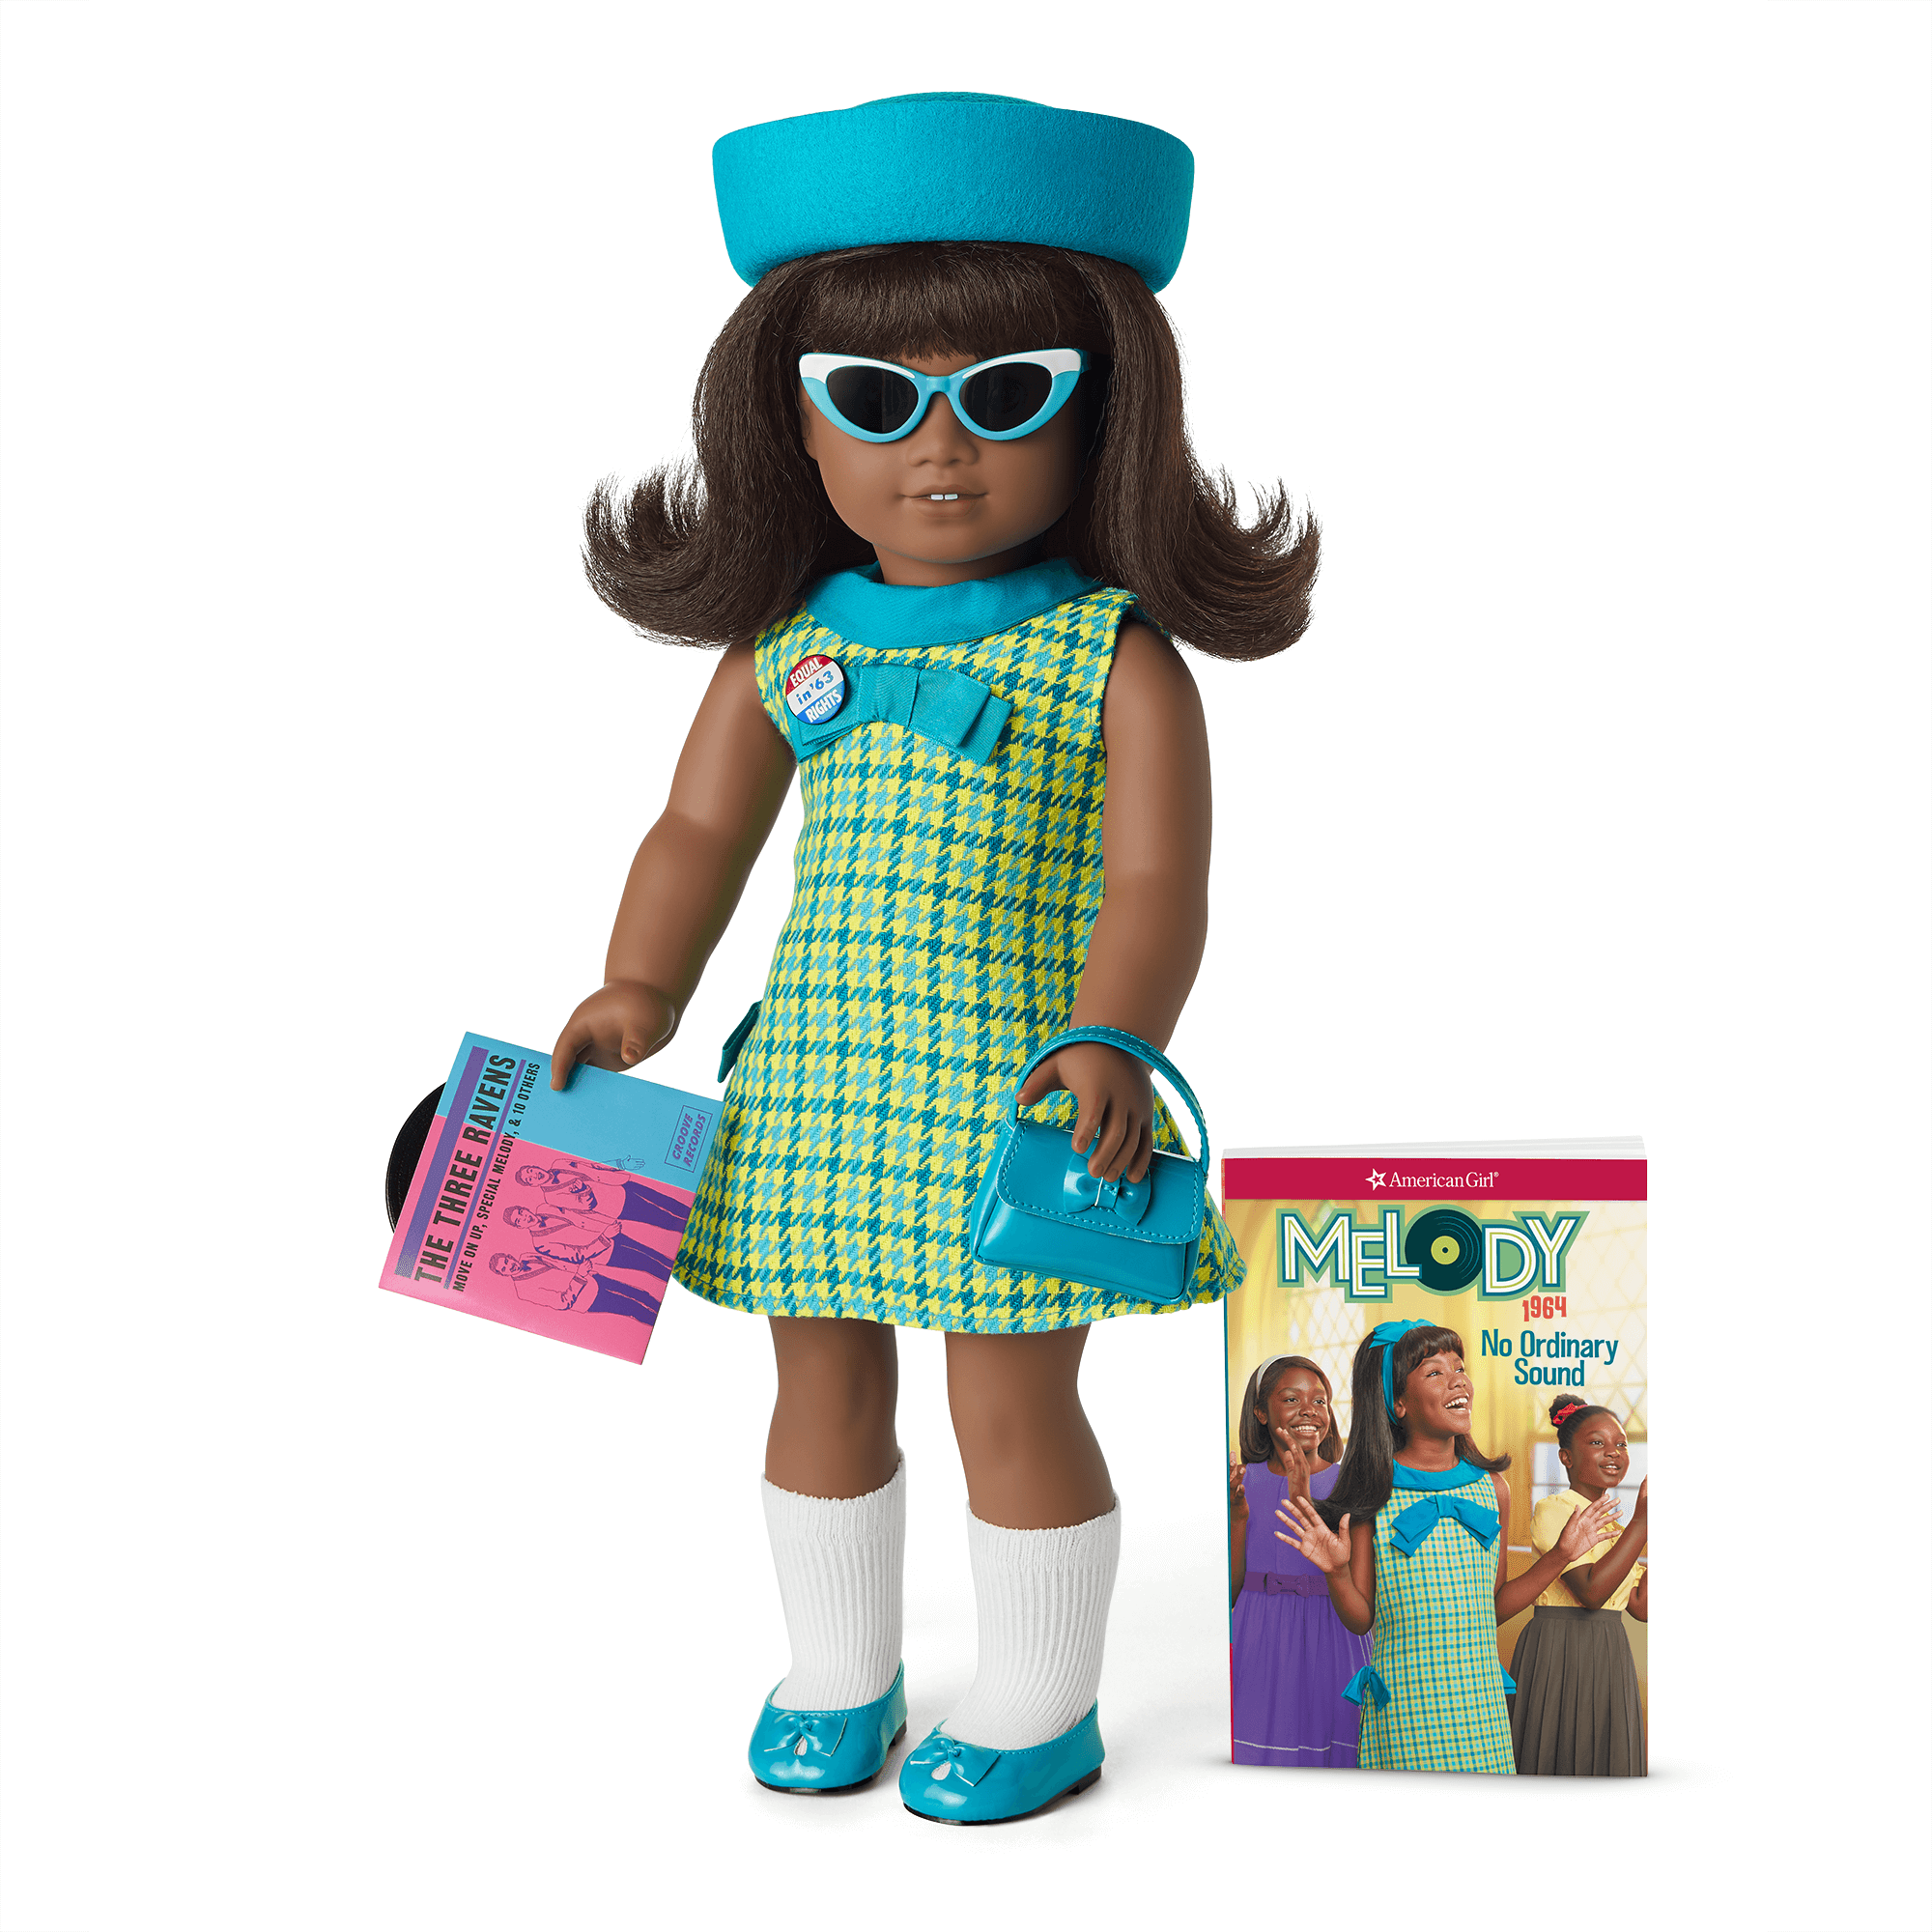 Melody™ Doll, Book & Accessories